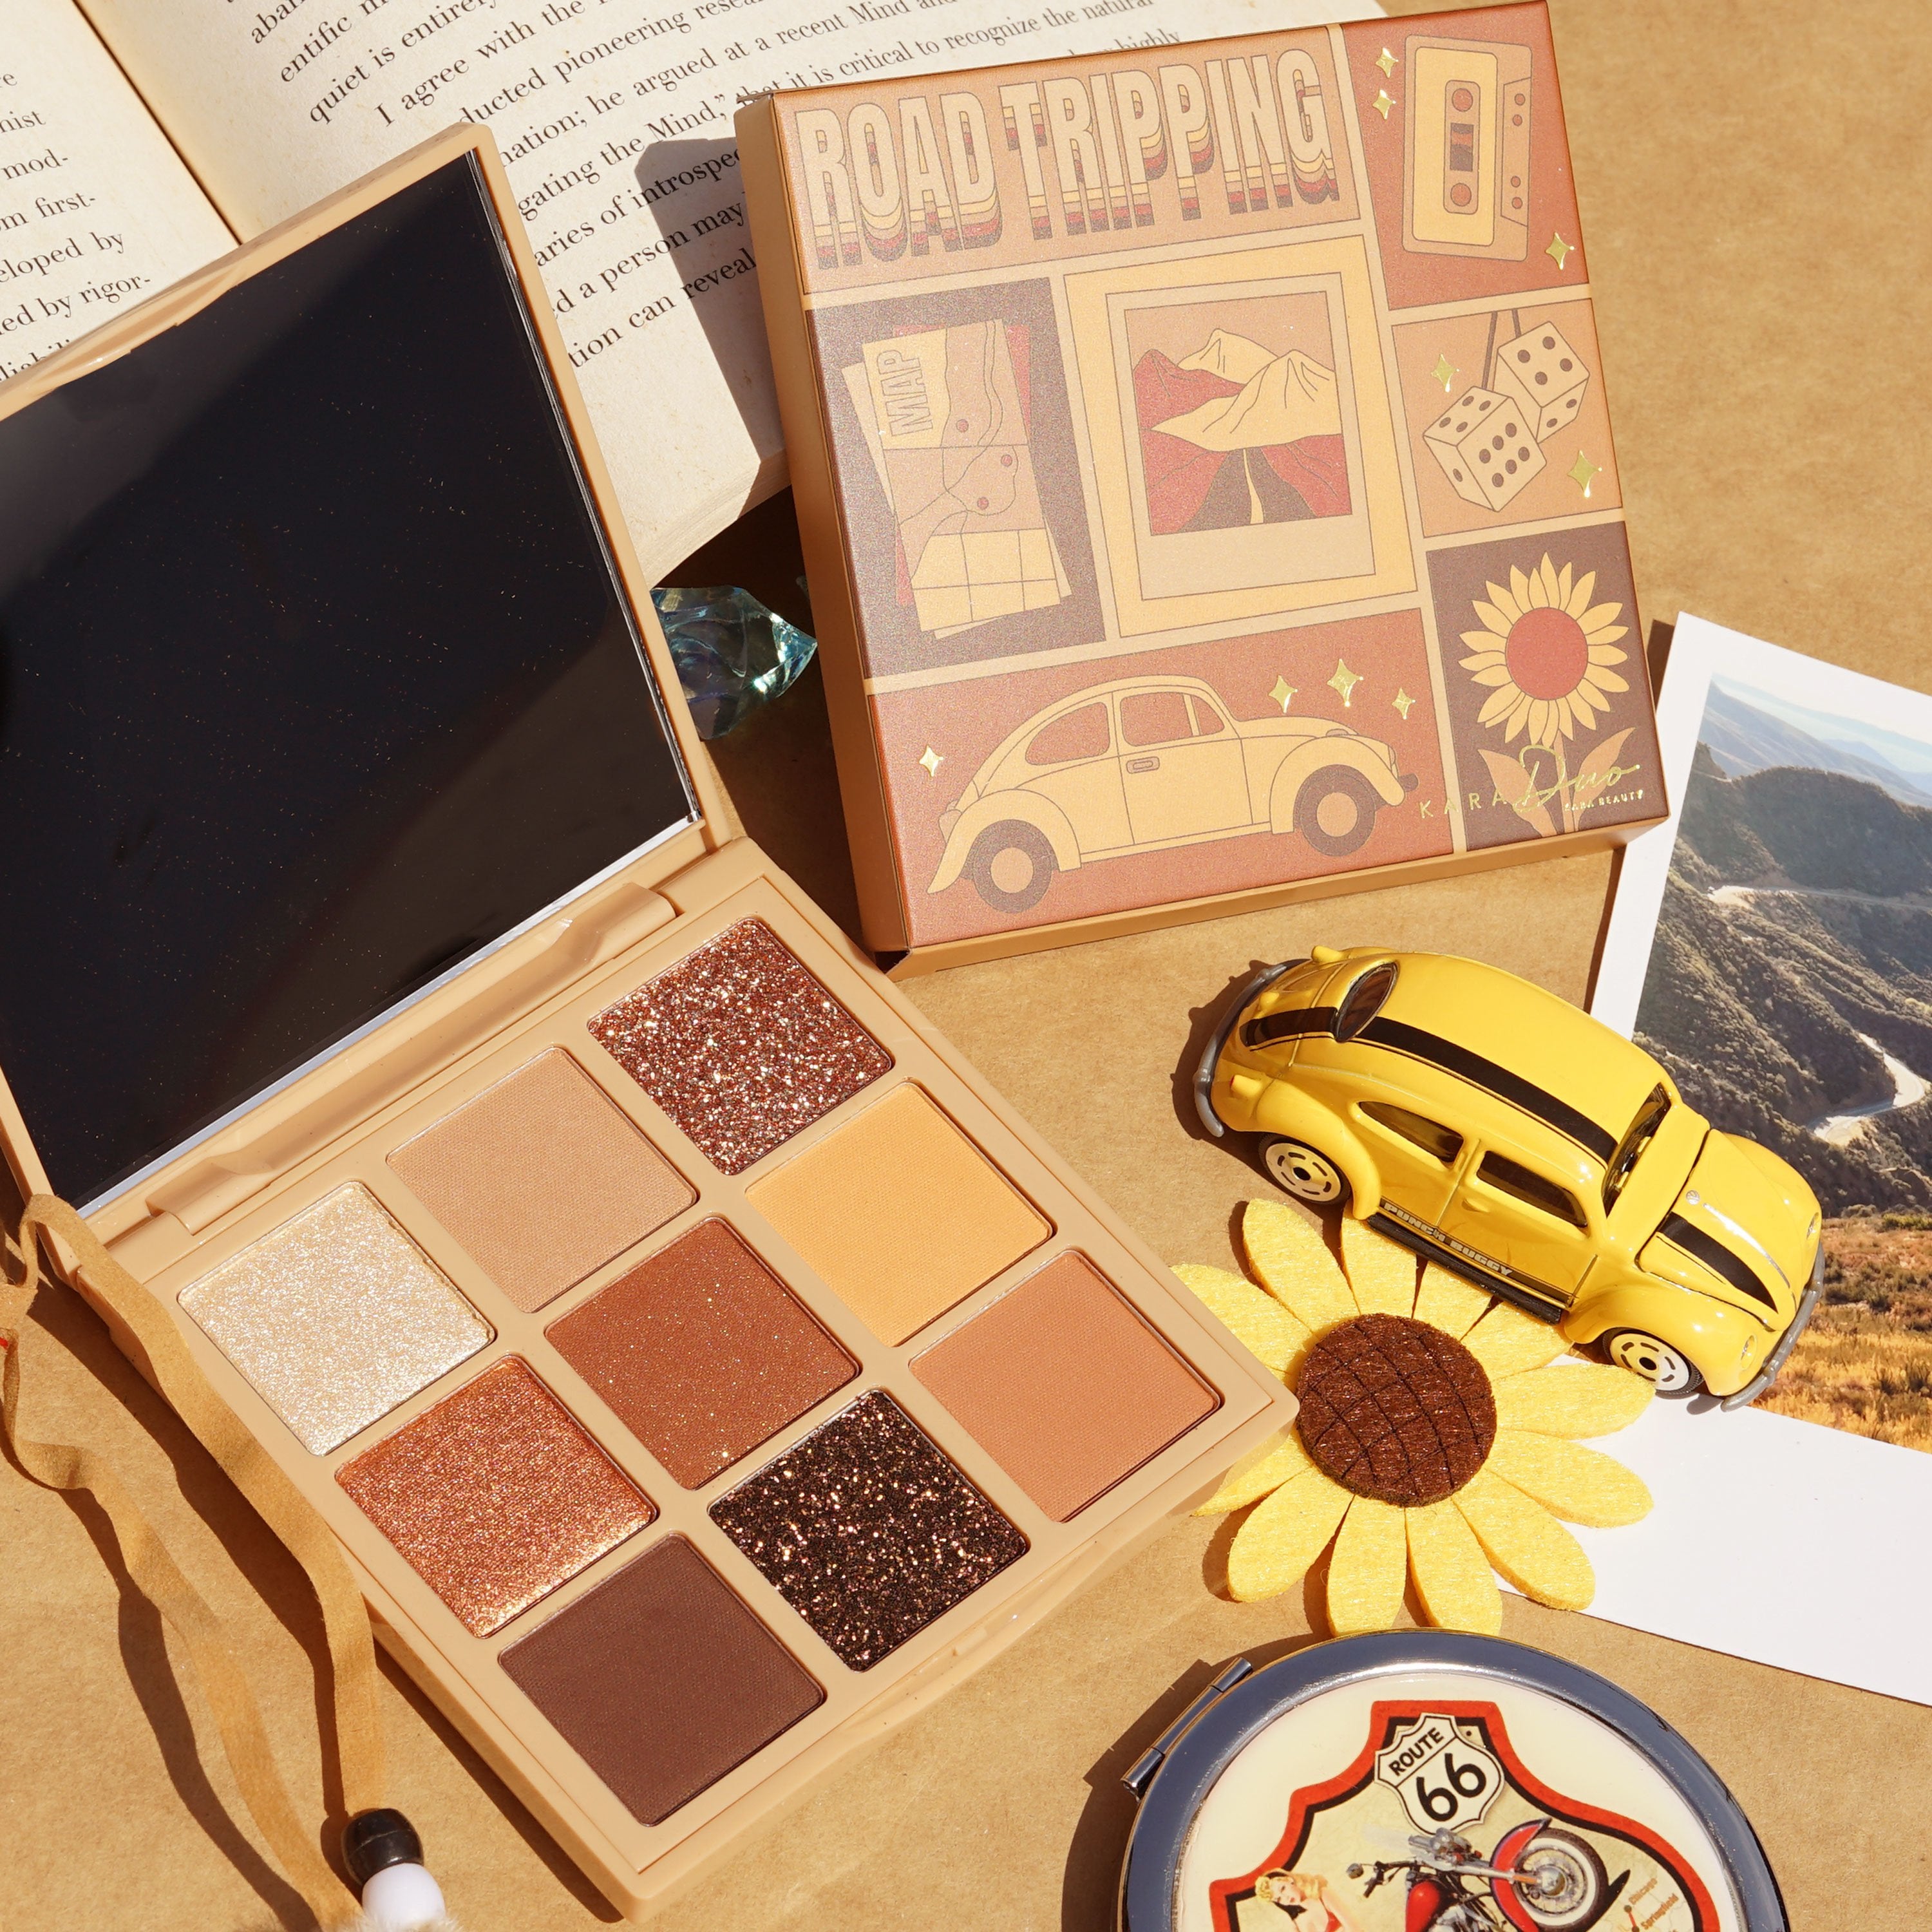 ES126 Road Tripping mini eyeshadow palette with props